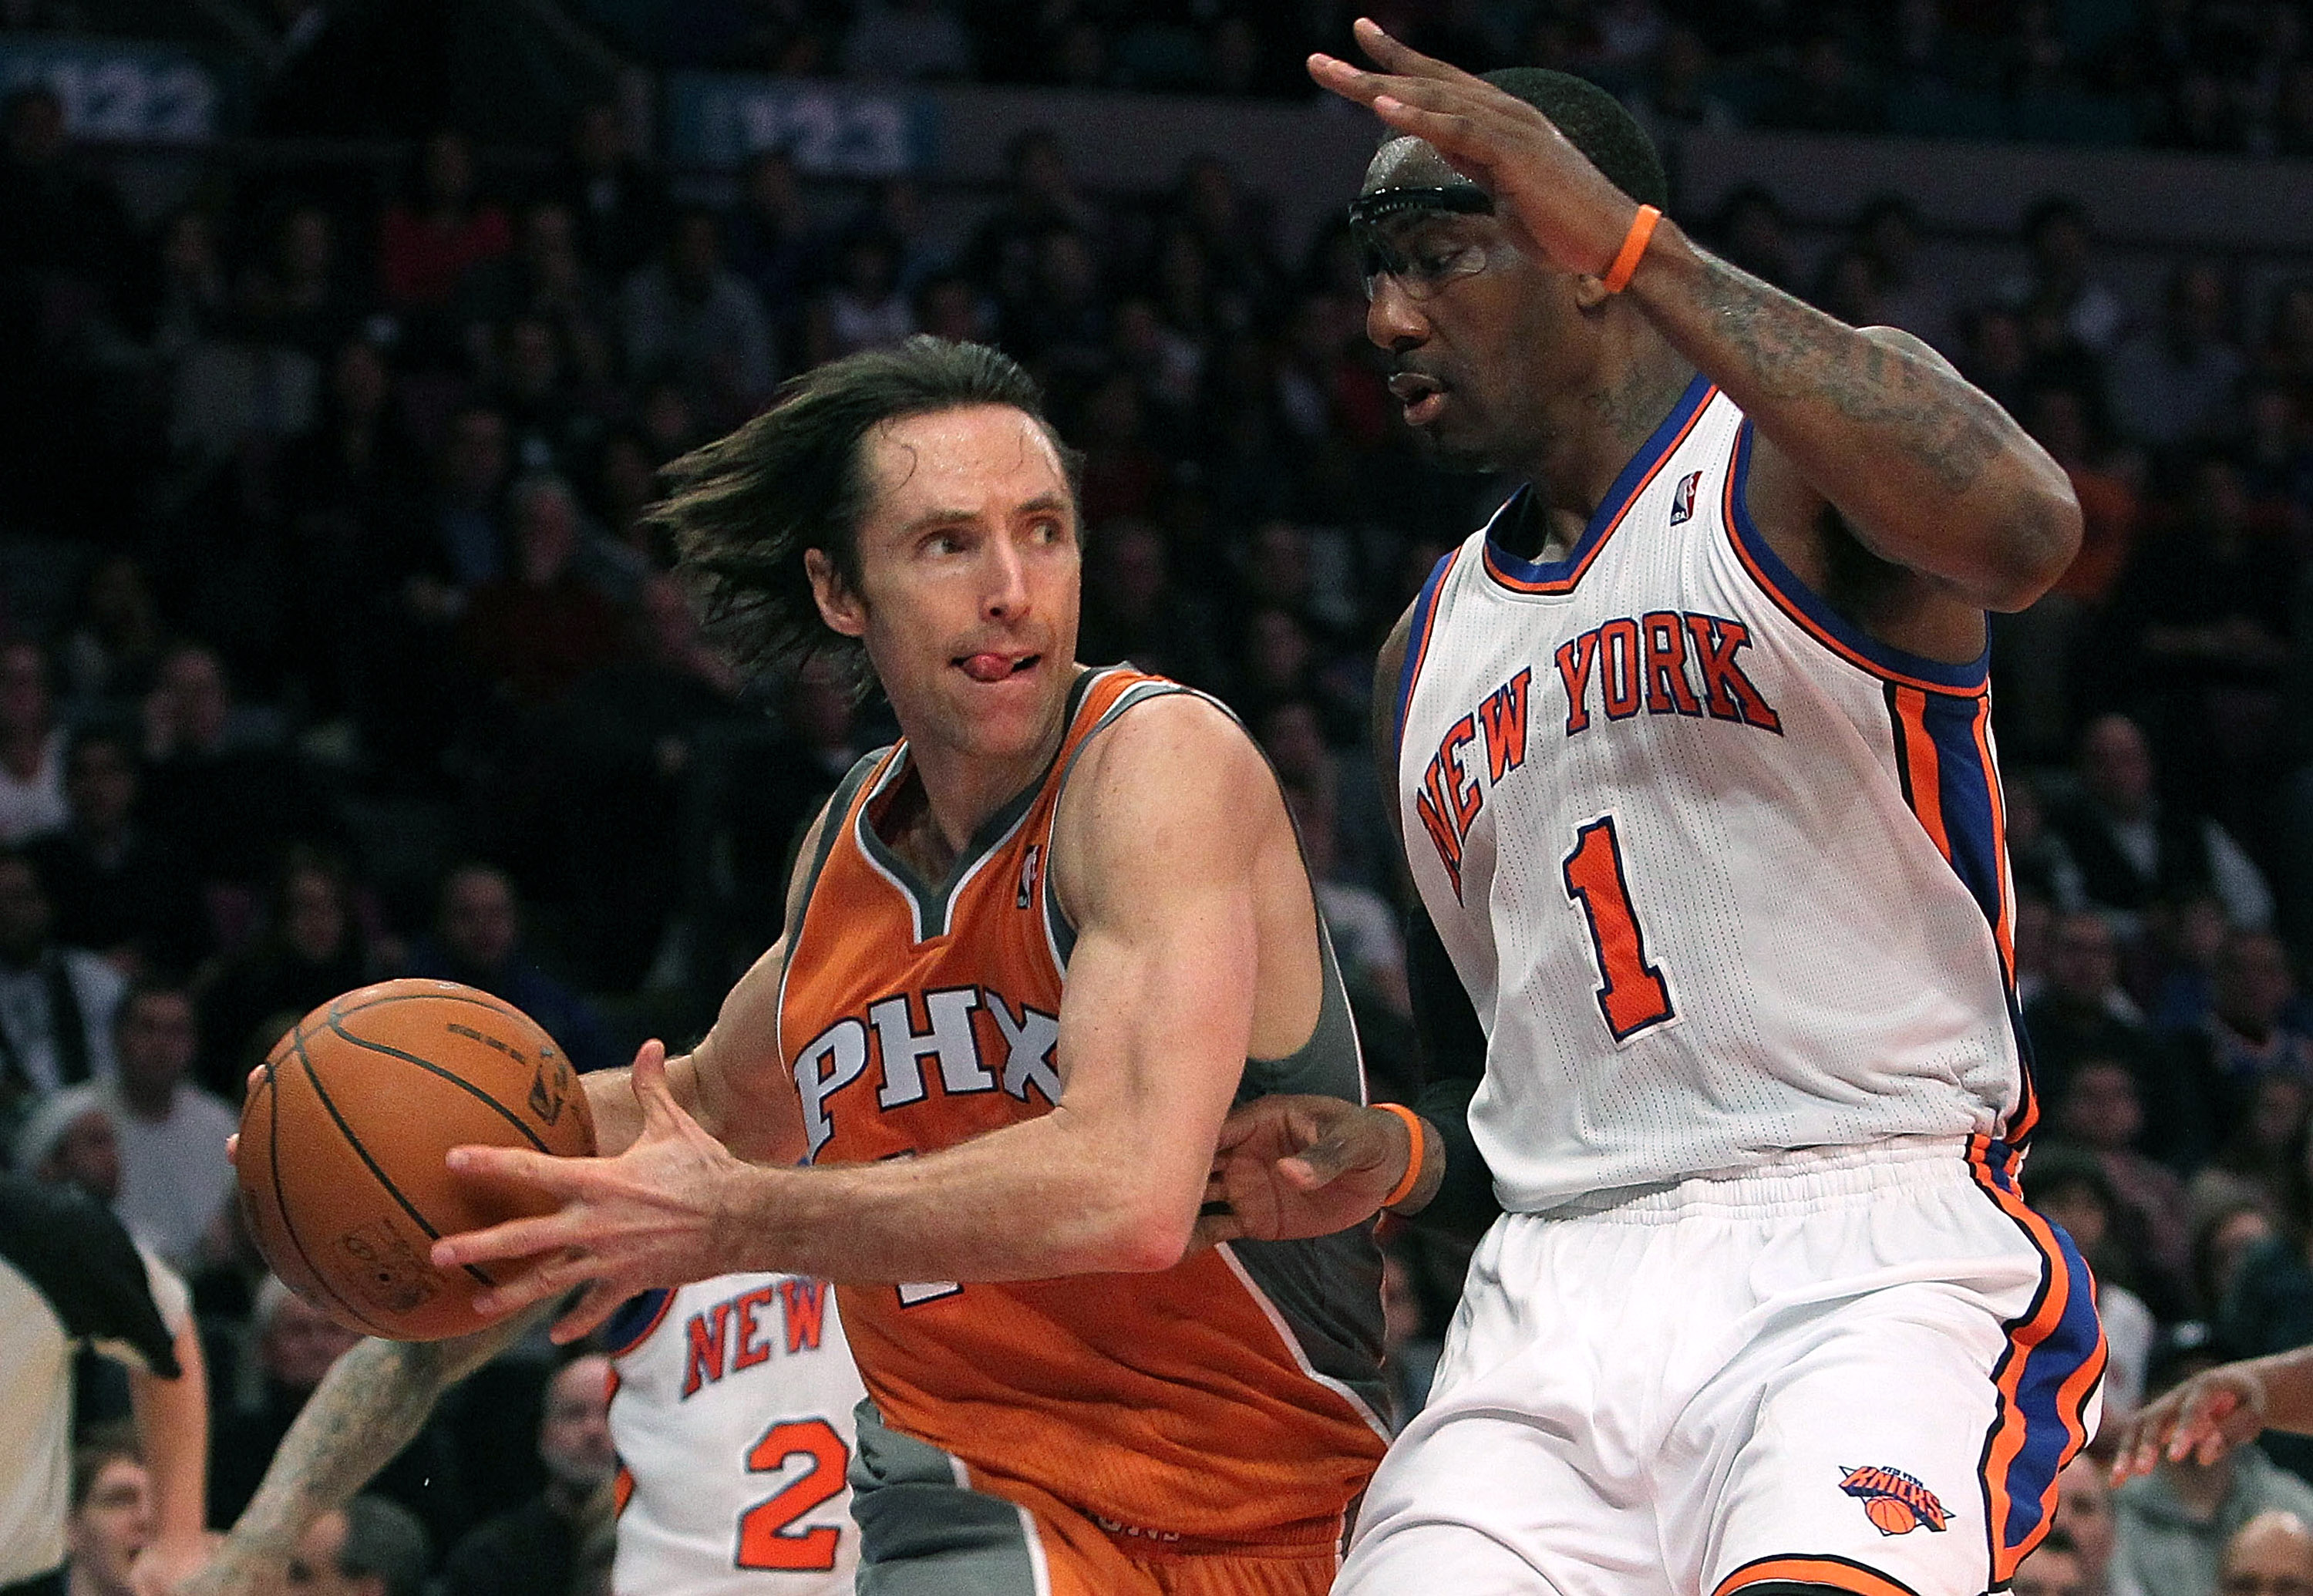 NEW YORK, NY - JANUARY 17:  Steve Nash #13 of the Phoenix Suns drives to the basket against Amar'e Stoudemire #1 of the New York Knicks at Madison Square Garden on January 17, 2011 in New York City. NOTE TO USER: User expressly acknowledges and agrees tha